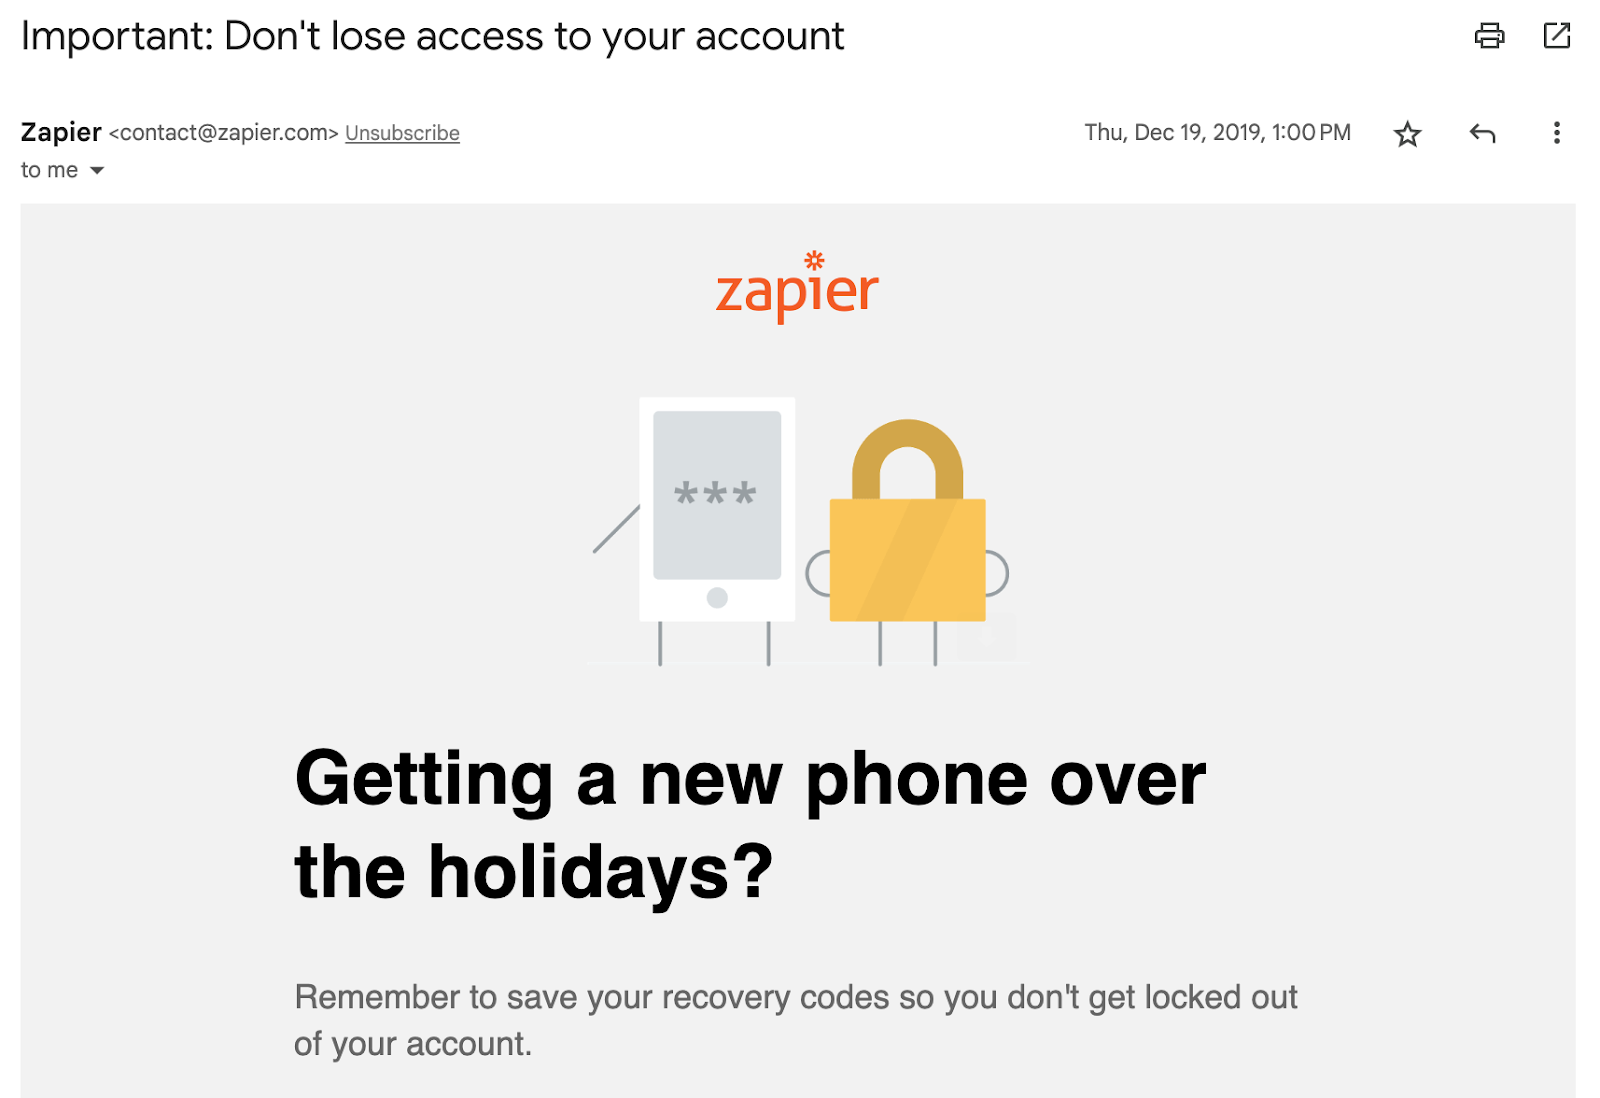 zapier recovery email reminder with headline "getting a new phone over the holidays?"